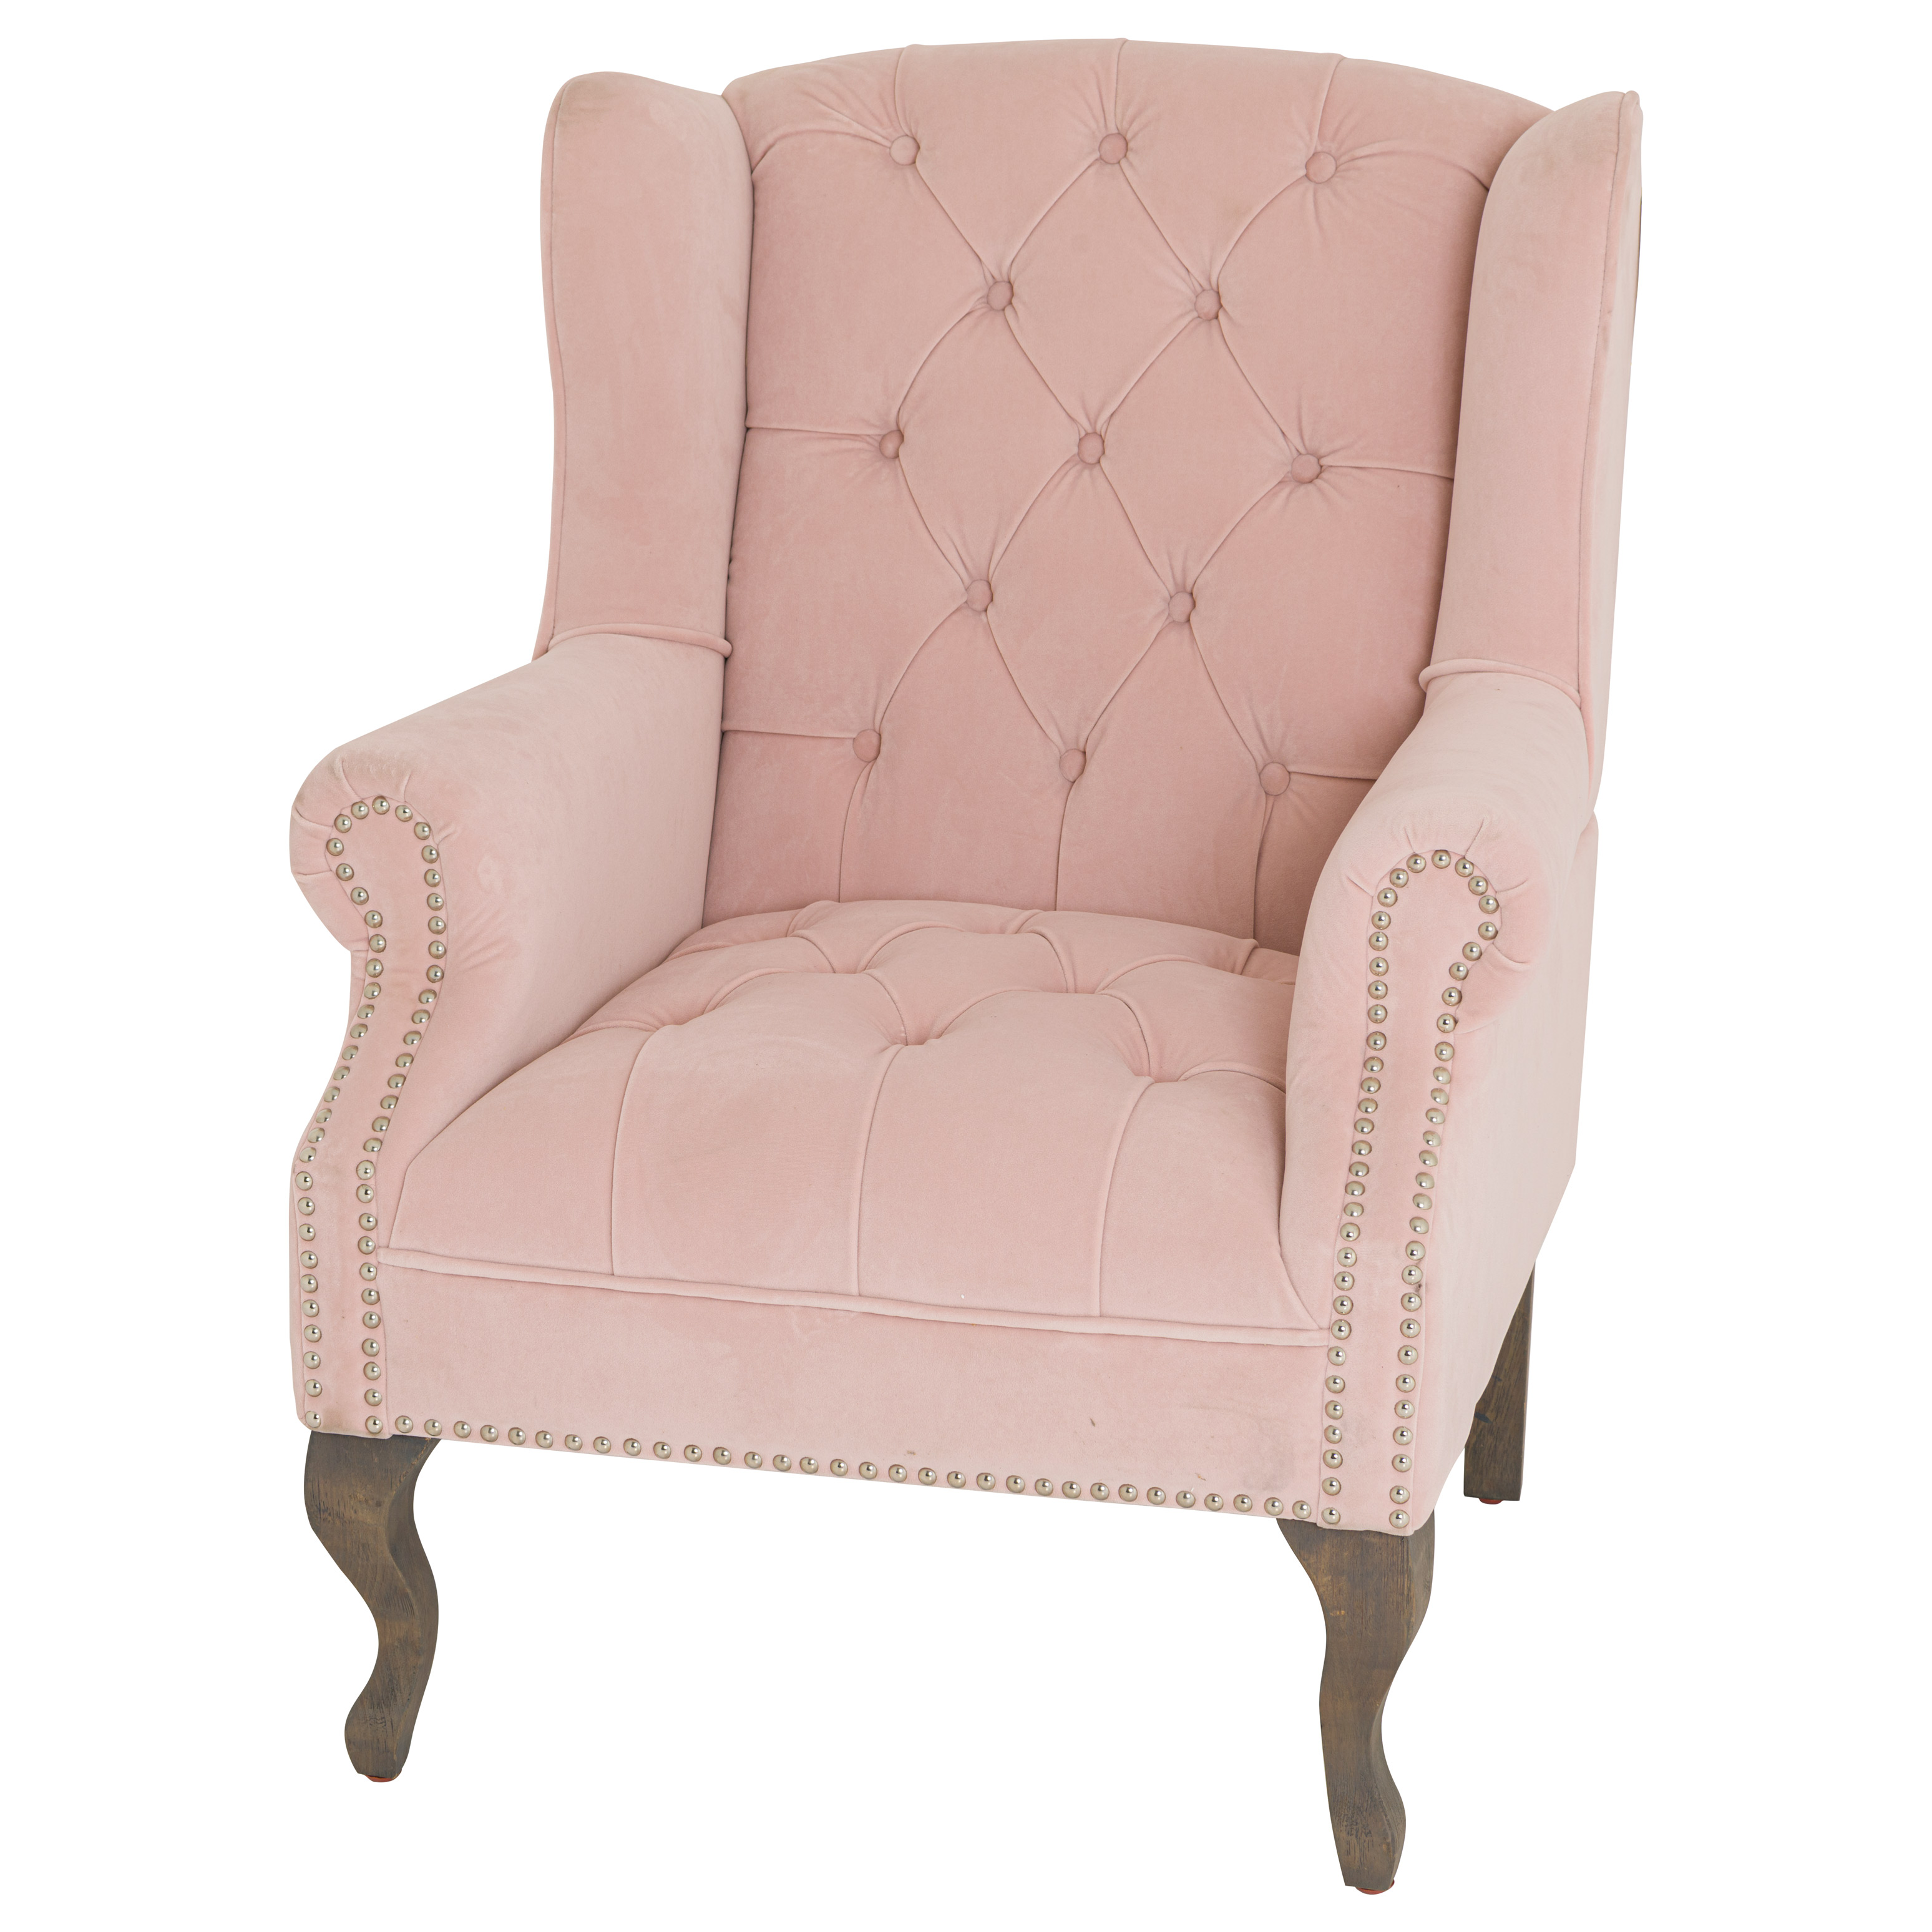 Blush Pink Wing Back Chair - Image 1